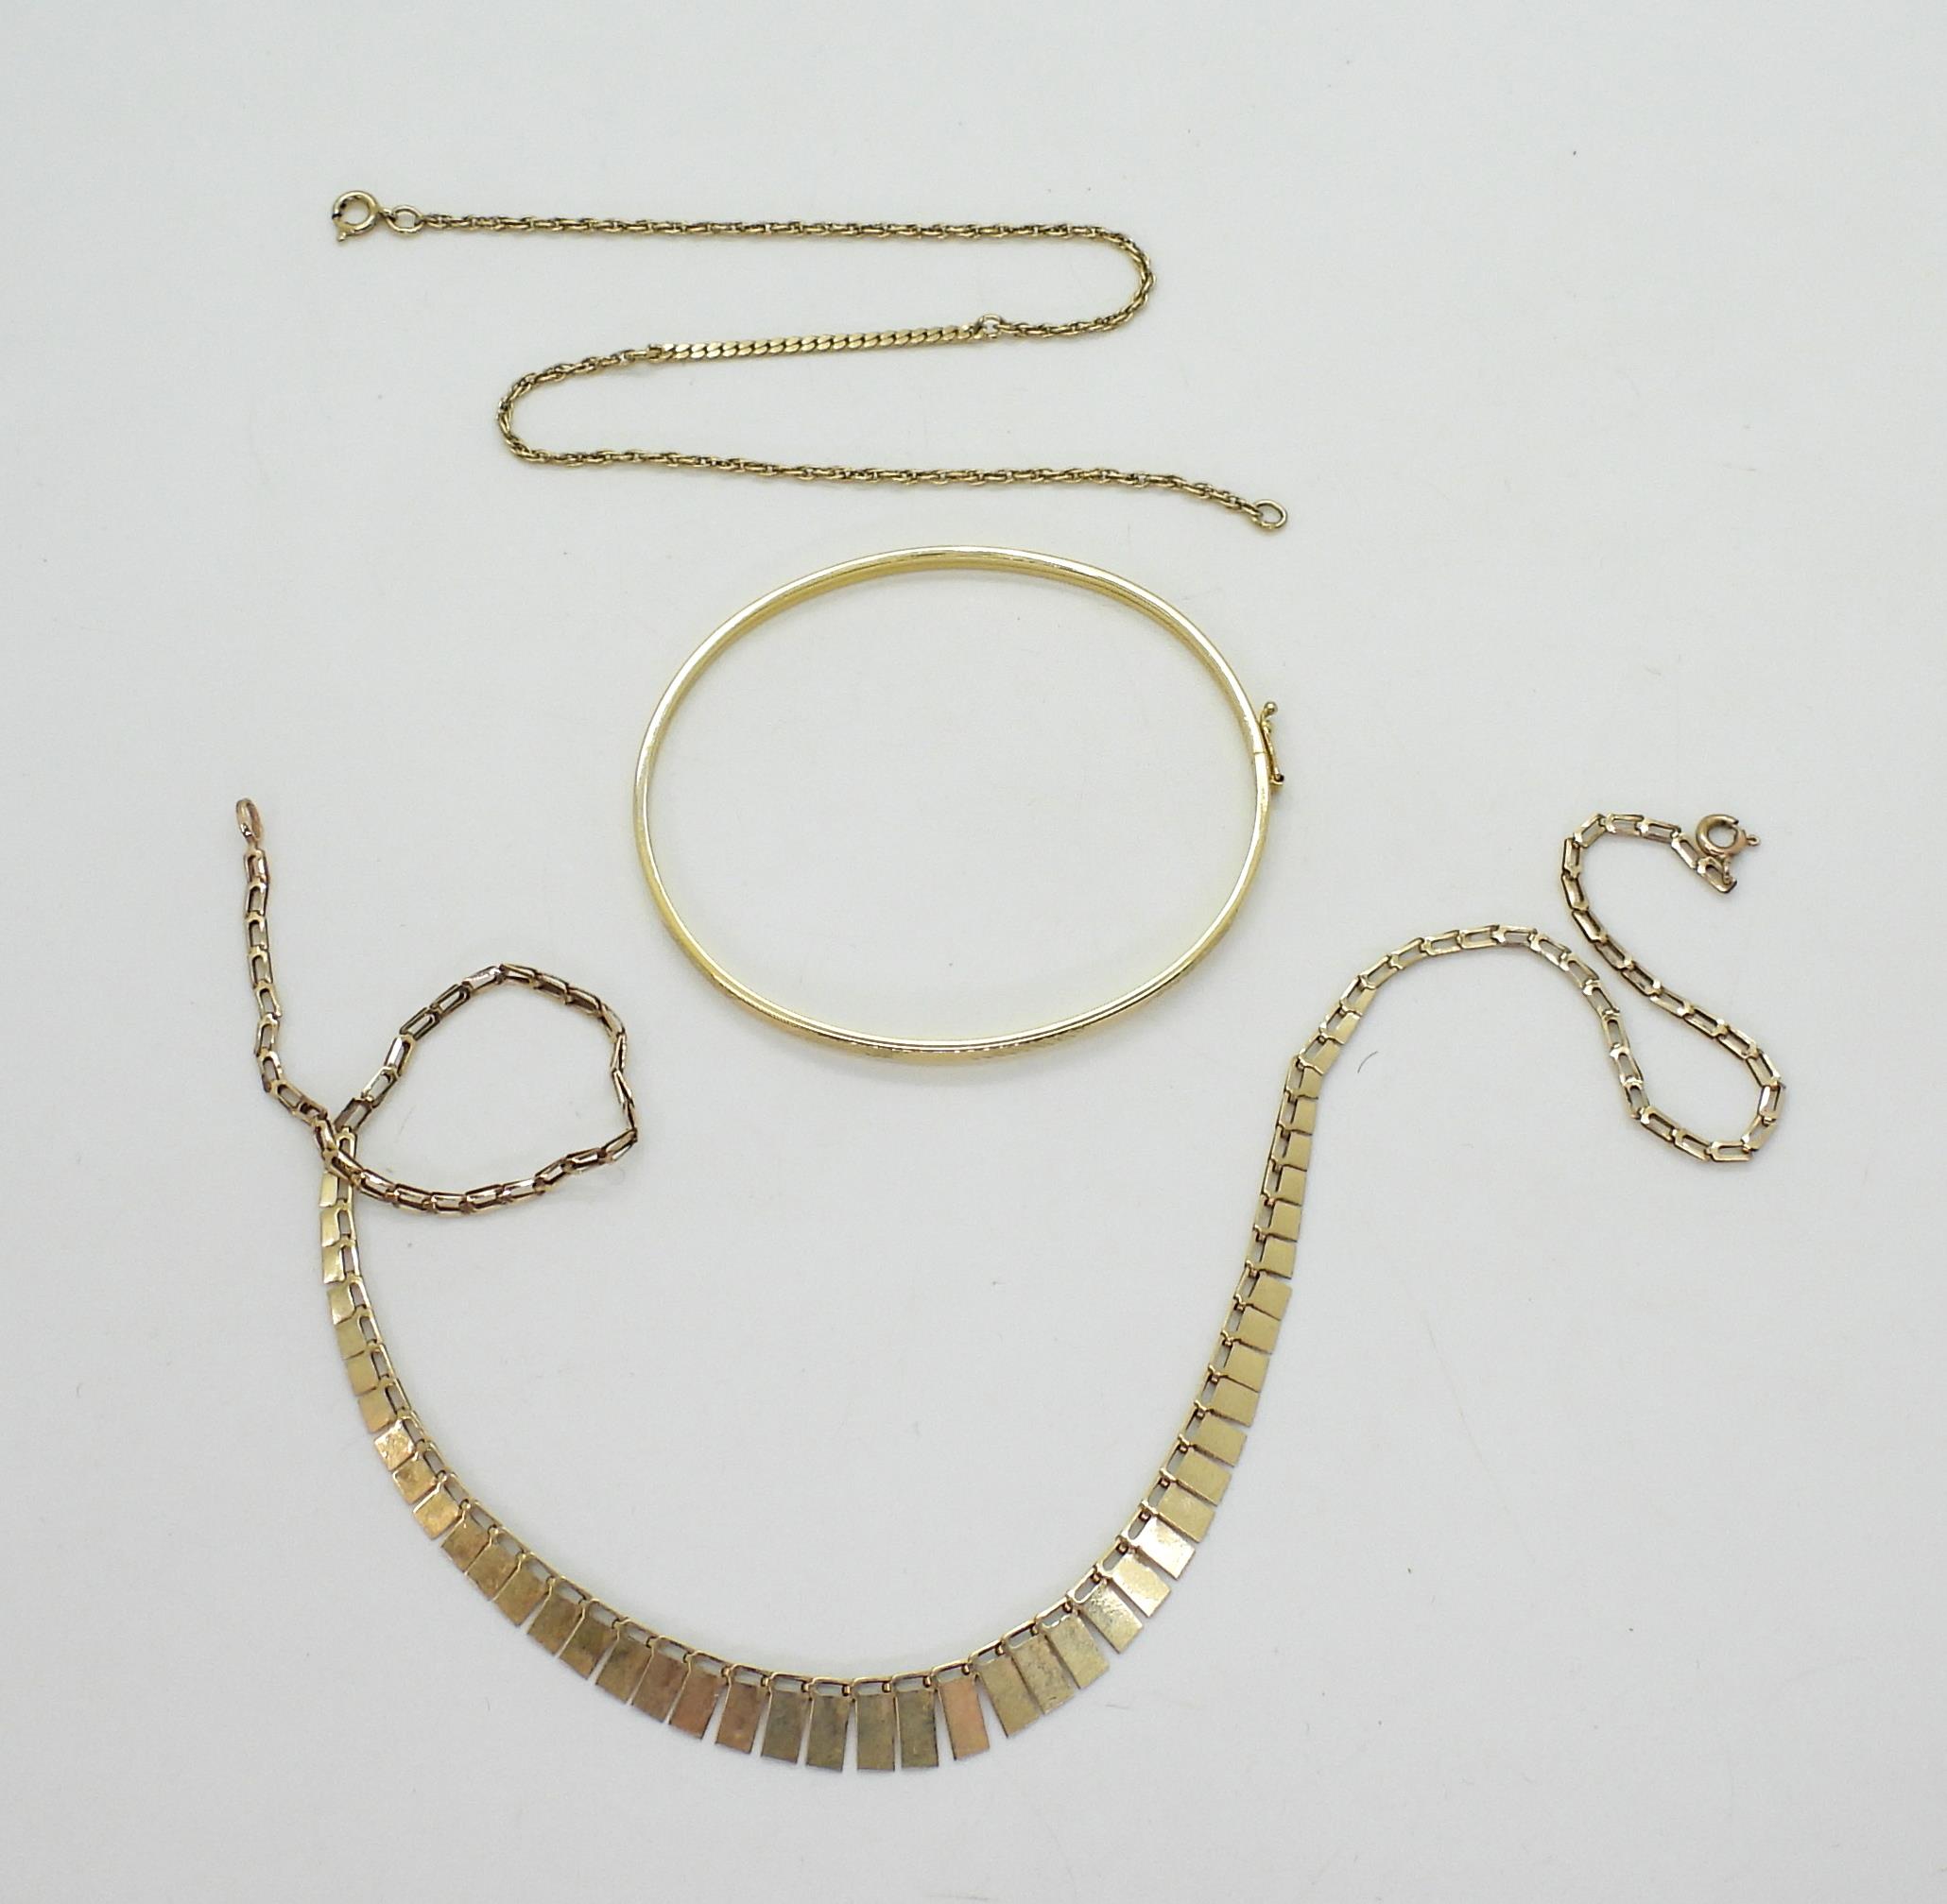 A 9ct gold bangle, 40cm fringe necklace, and a yellow metal chain bracelet, weight 9.8gms - Image 2 of 2